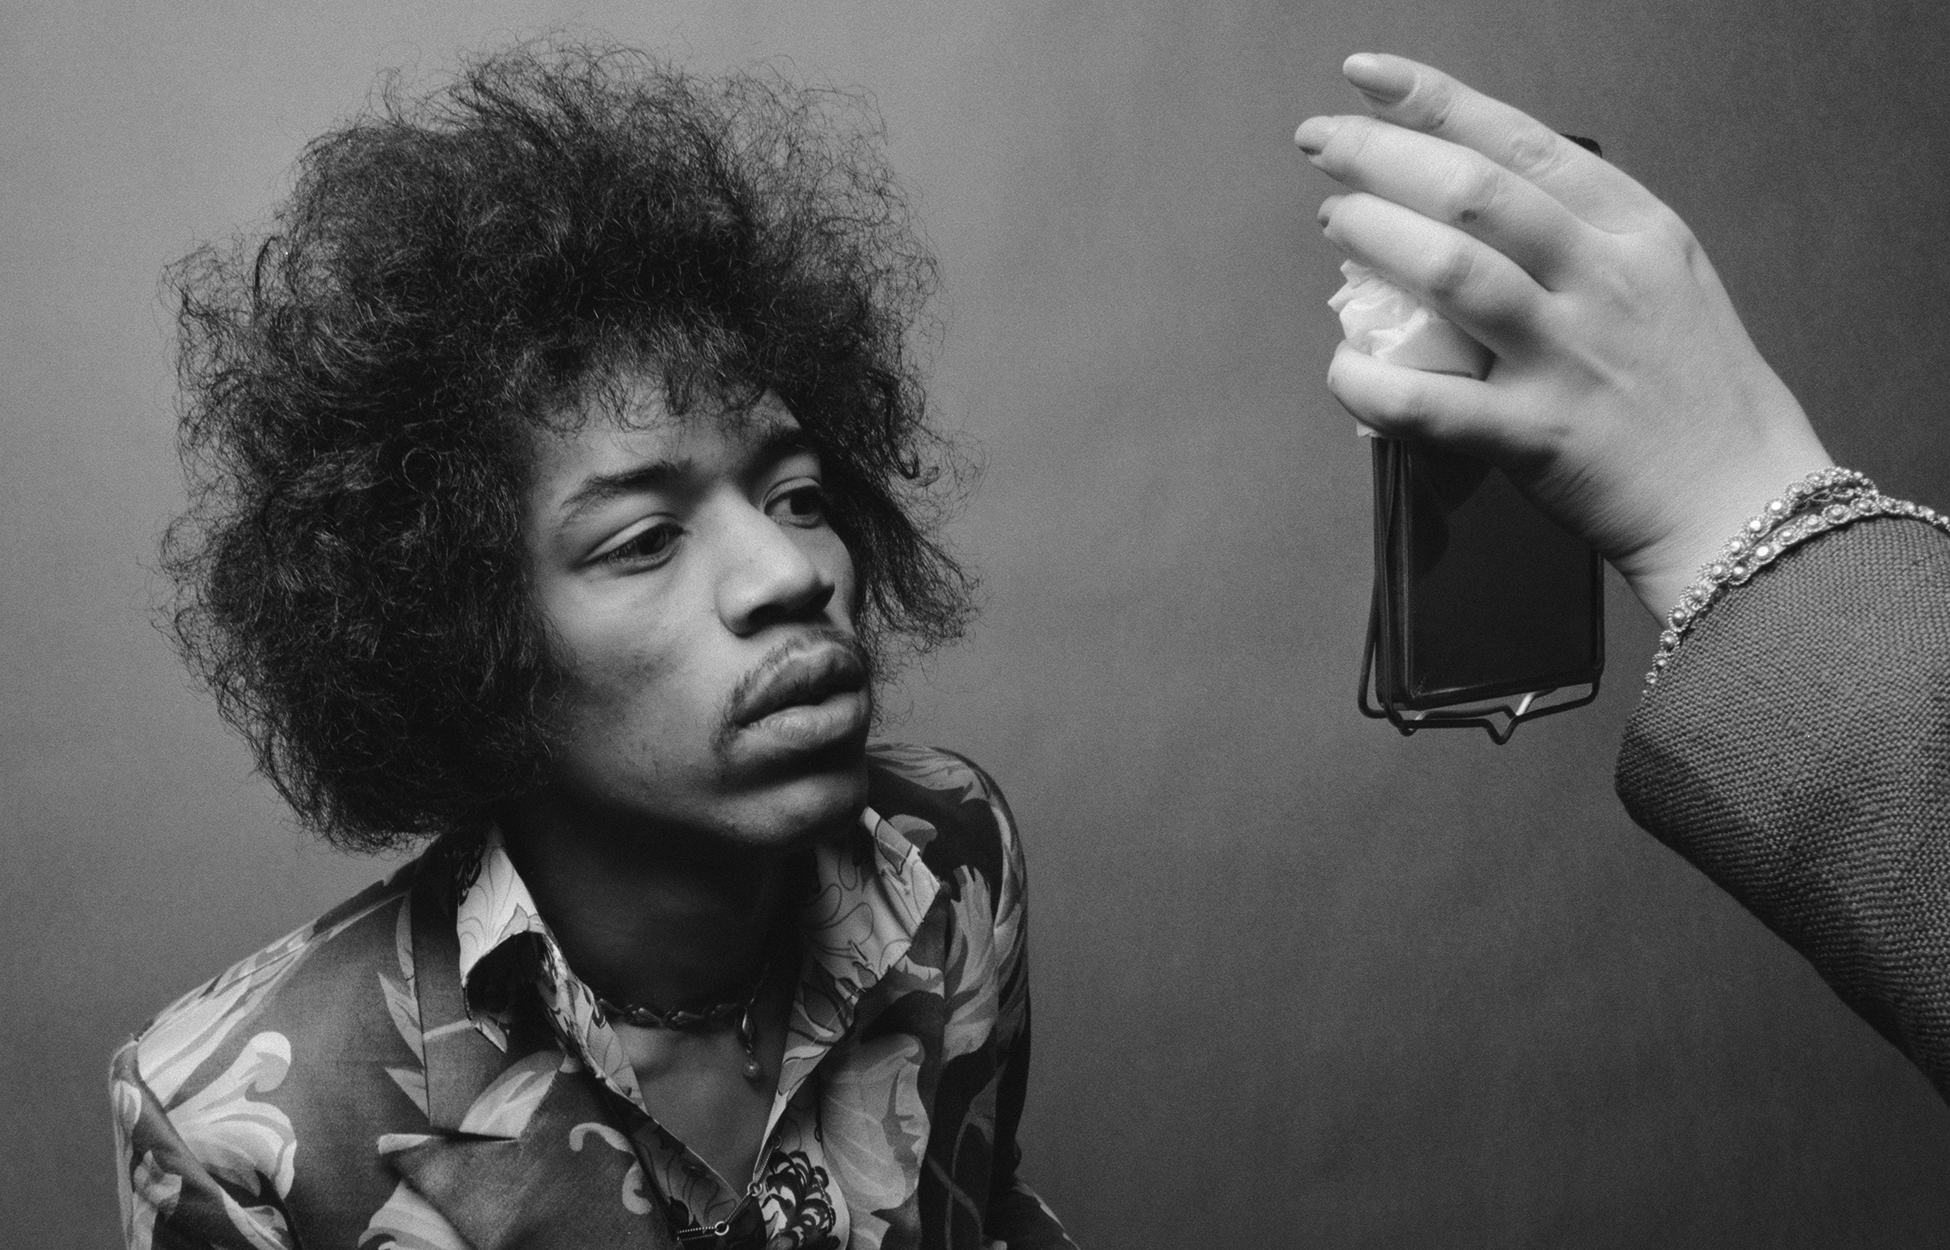 Jimi Hendrix Wallpaper Image Photos Pictures Background